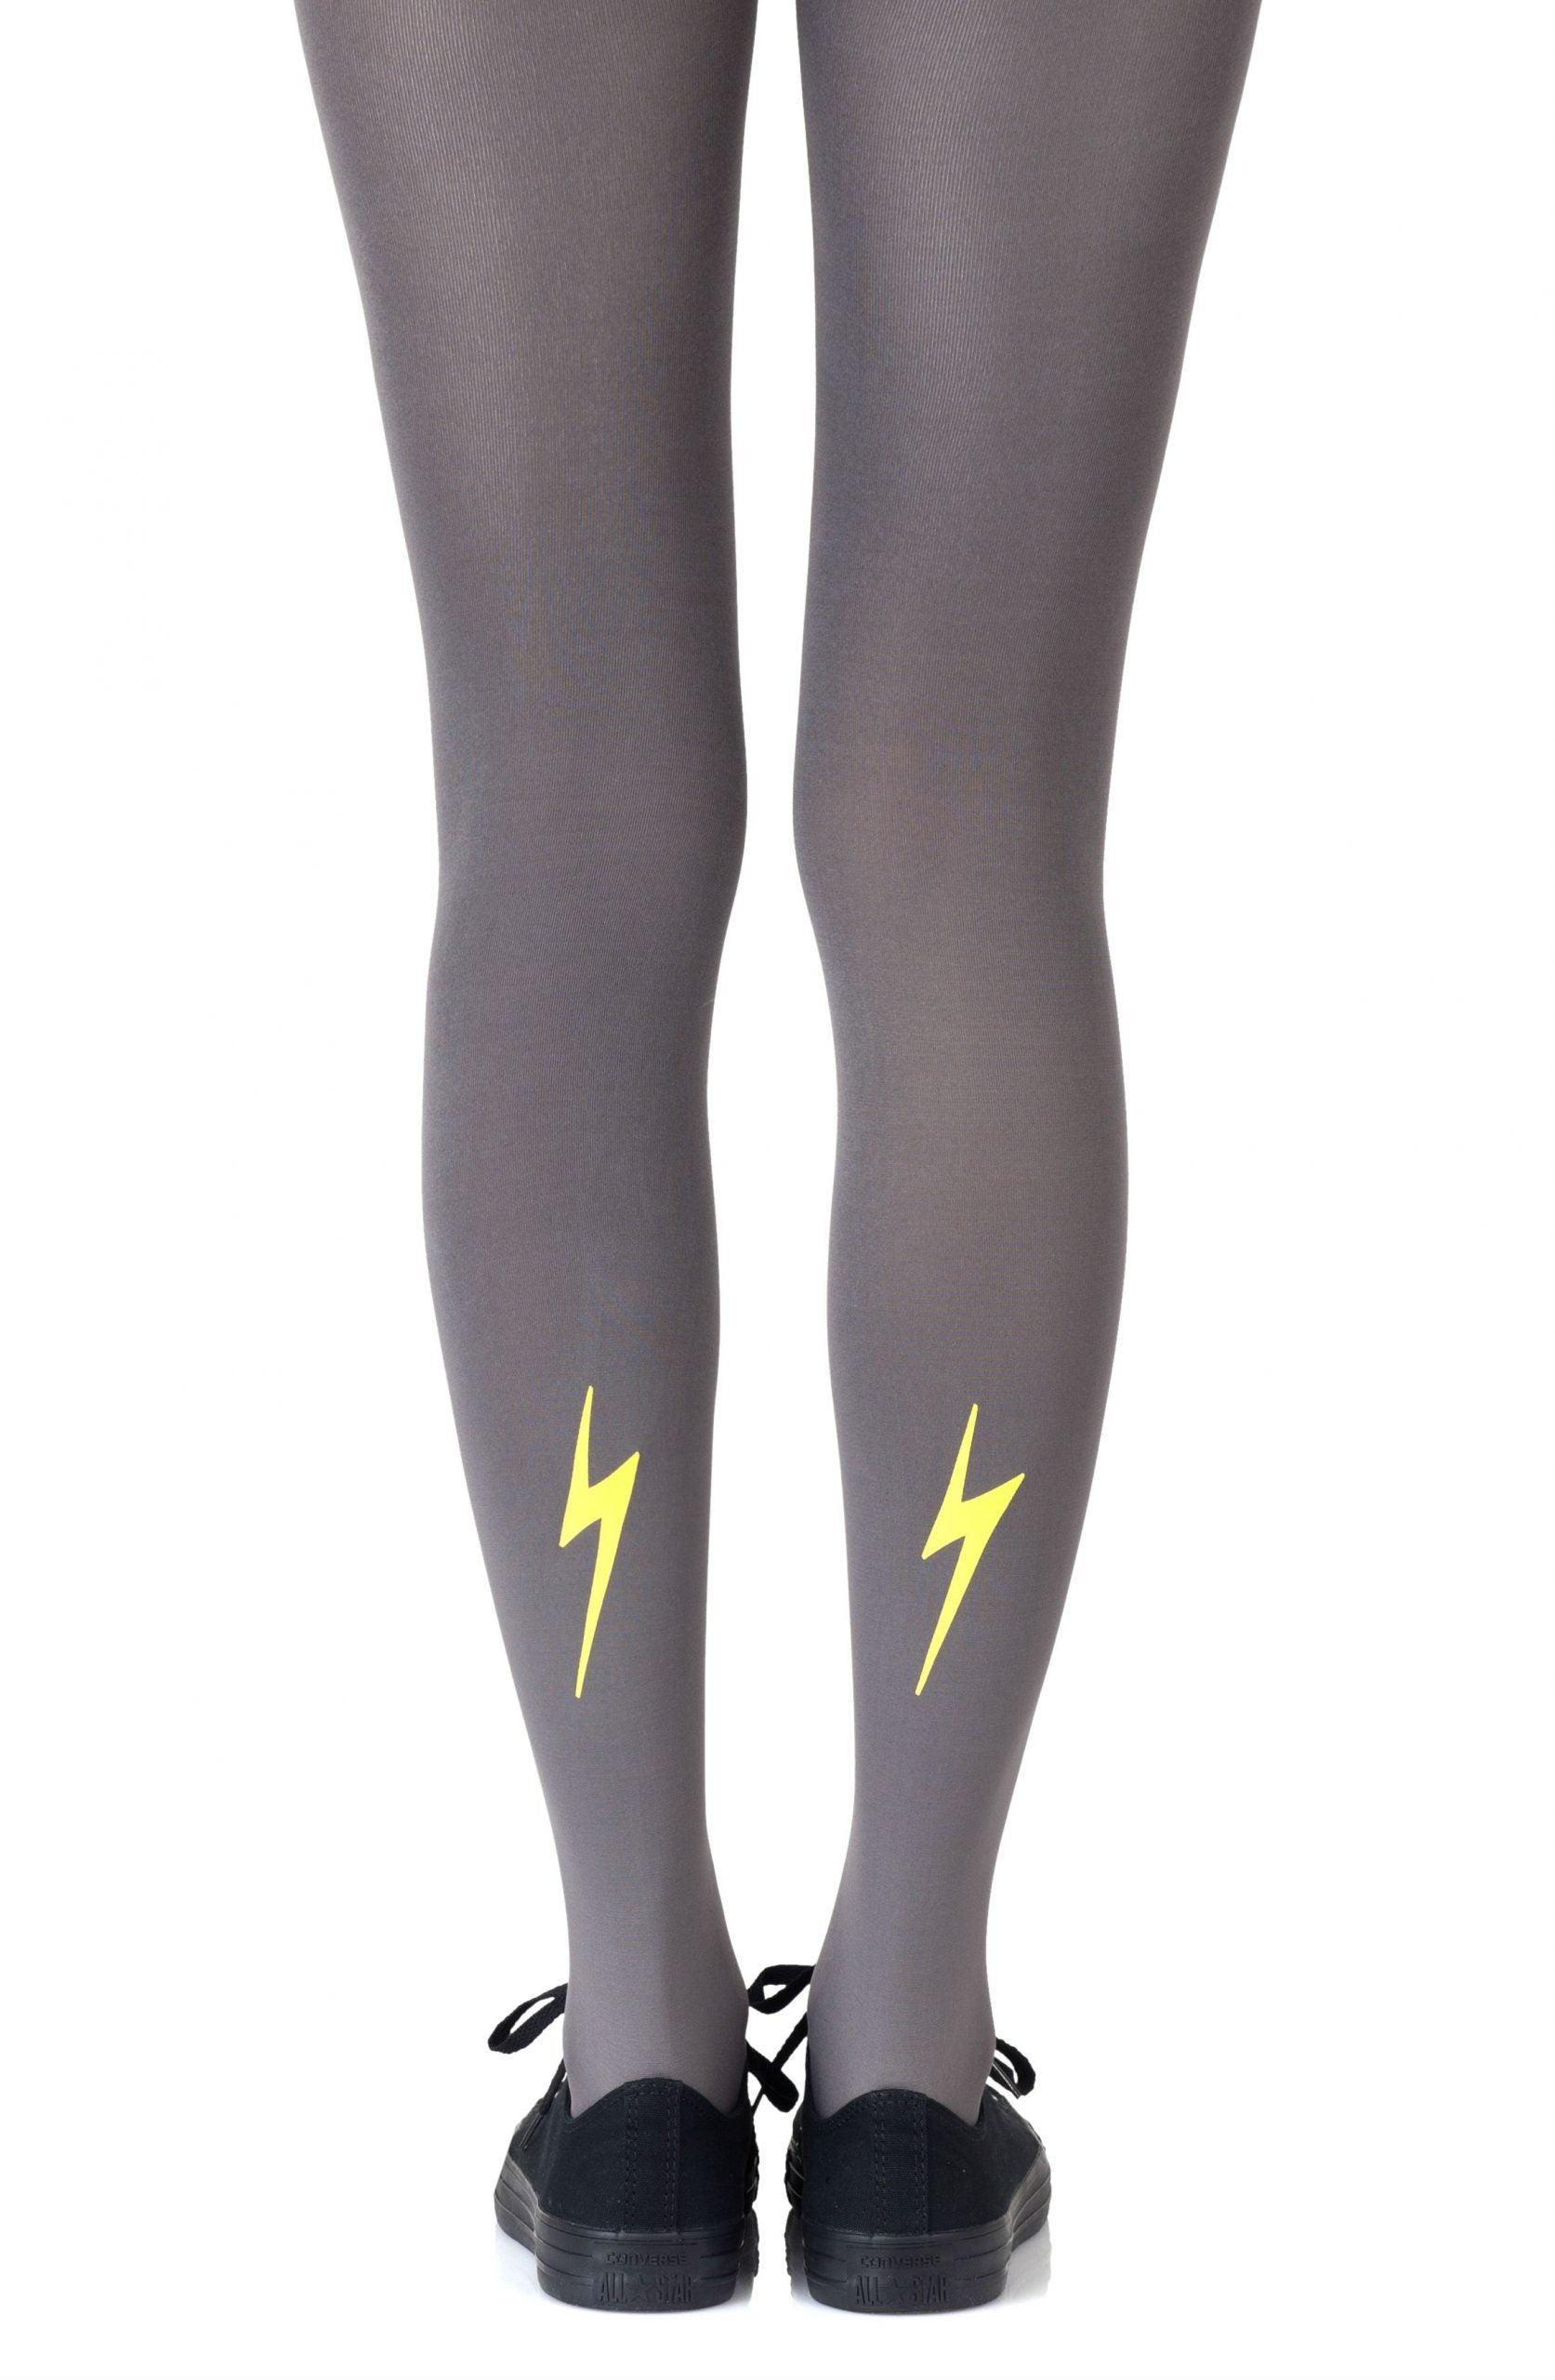 Zohara "Electric Feel" Yellow Print Tights - Sydney Rose Lingerie 